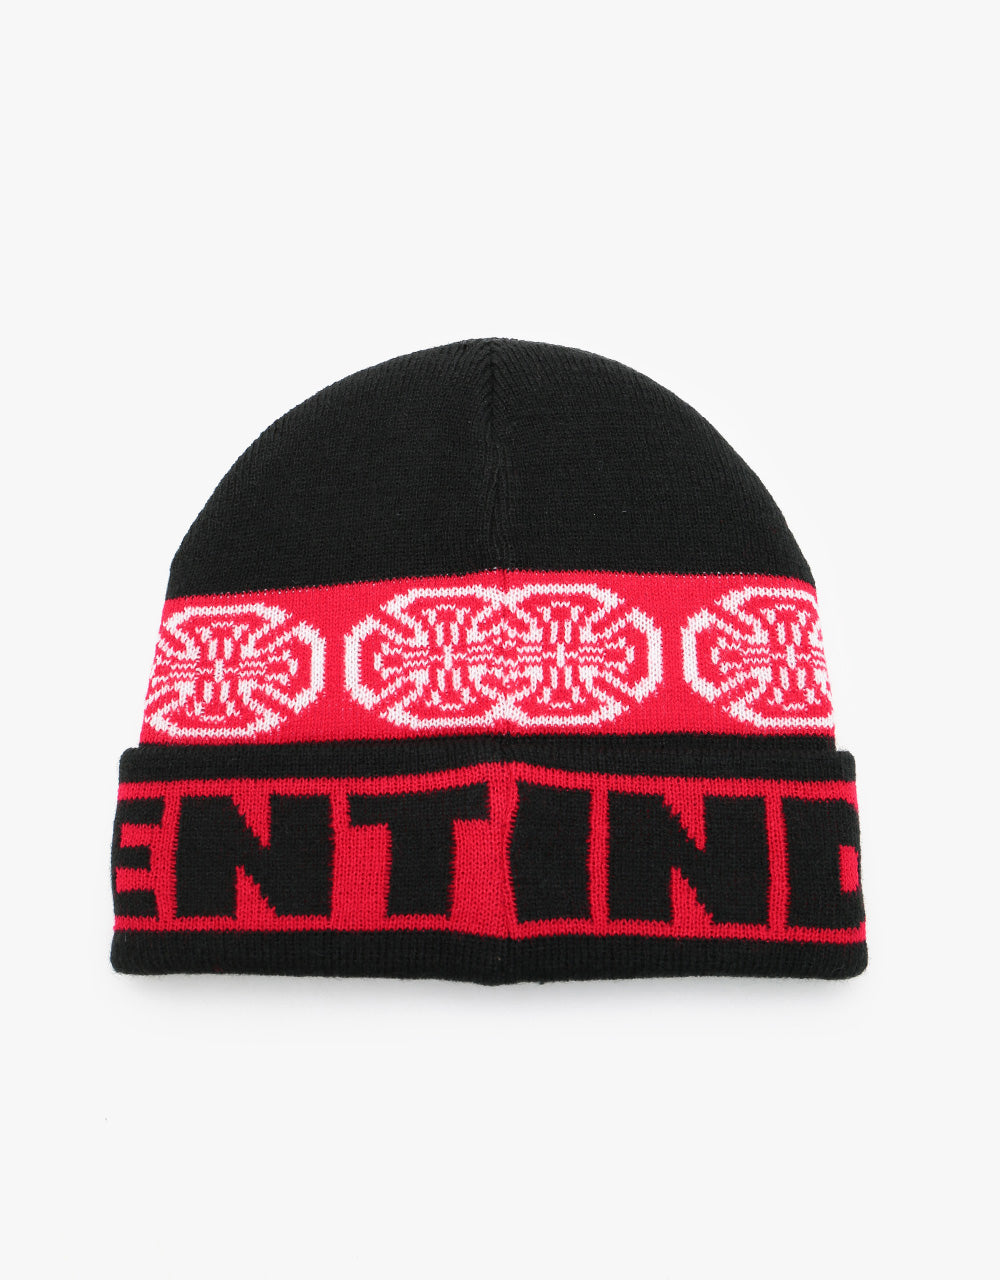 Independent Woven Crosses Fold Over Beanie - Black/Red – Route One